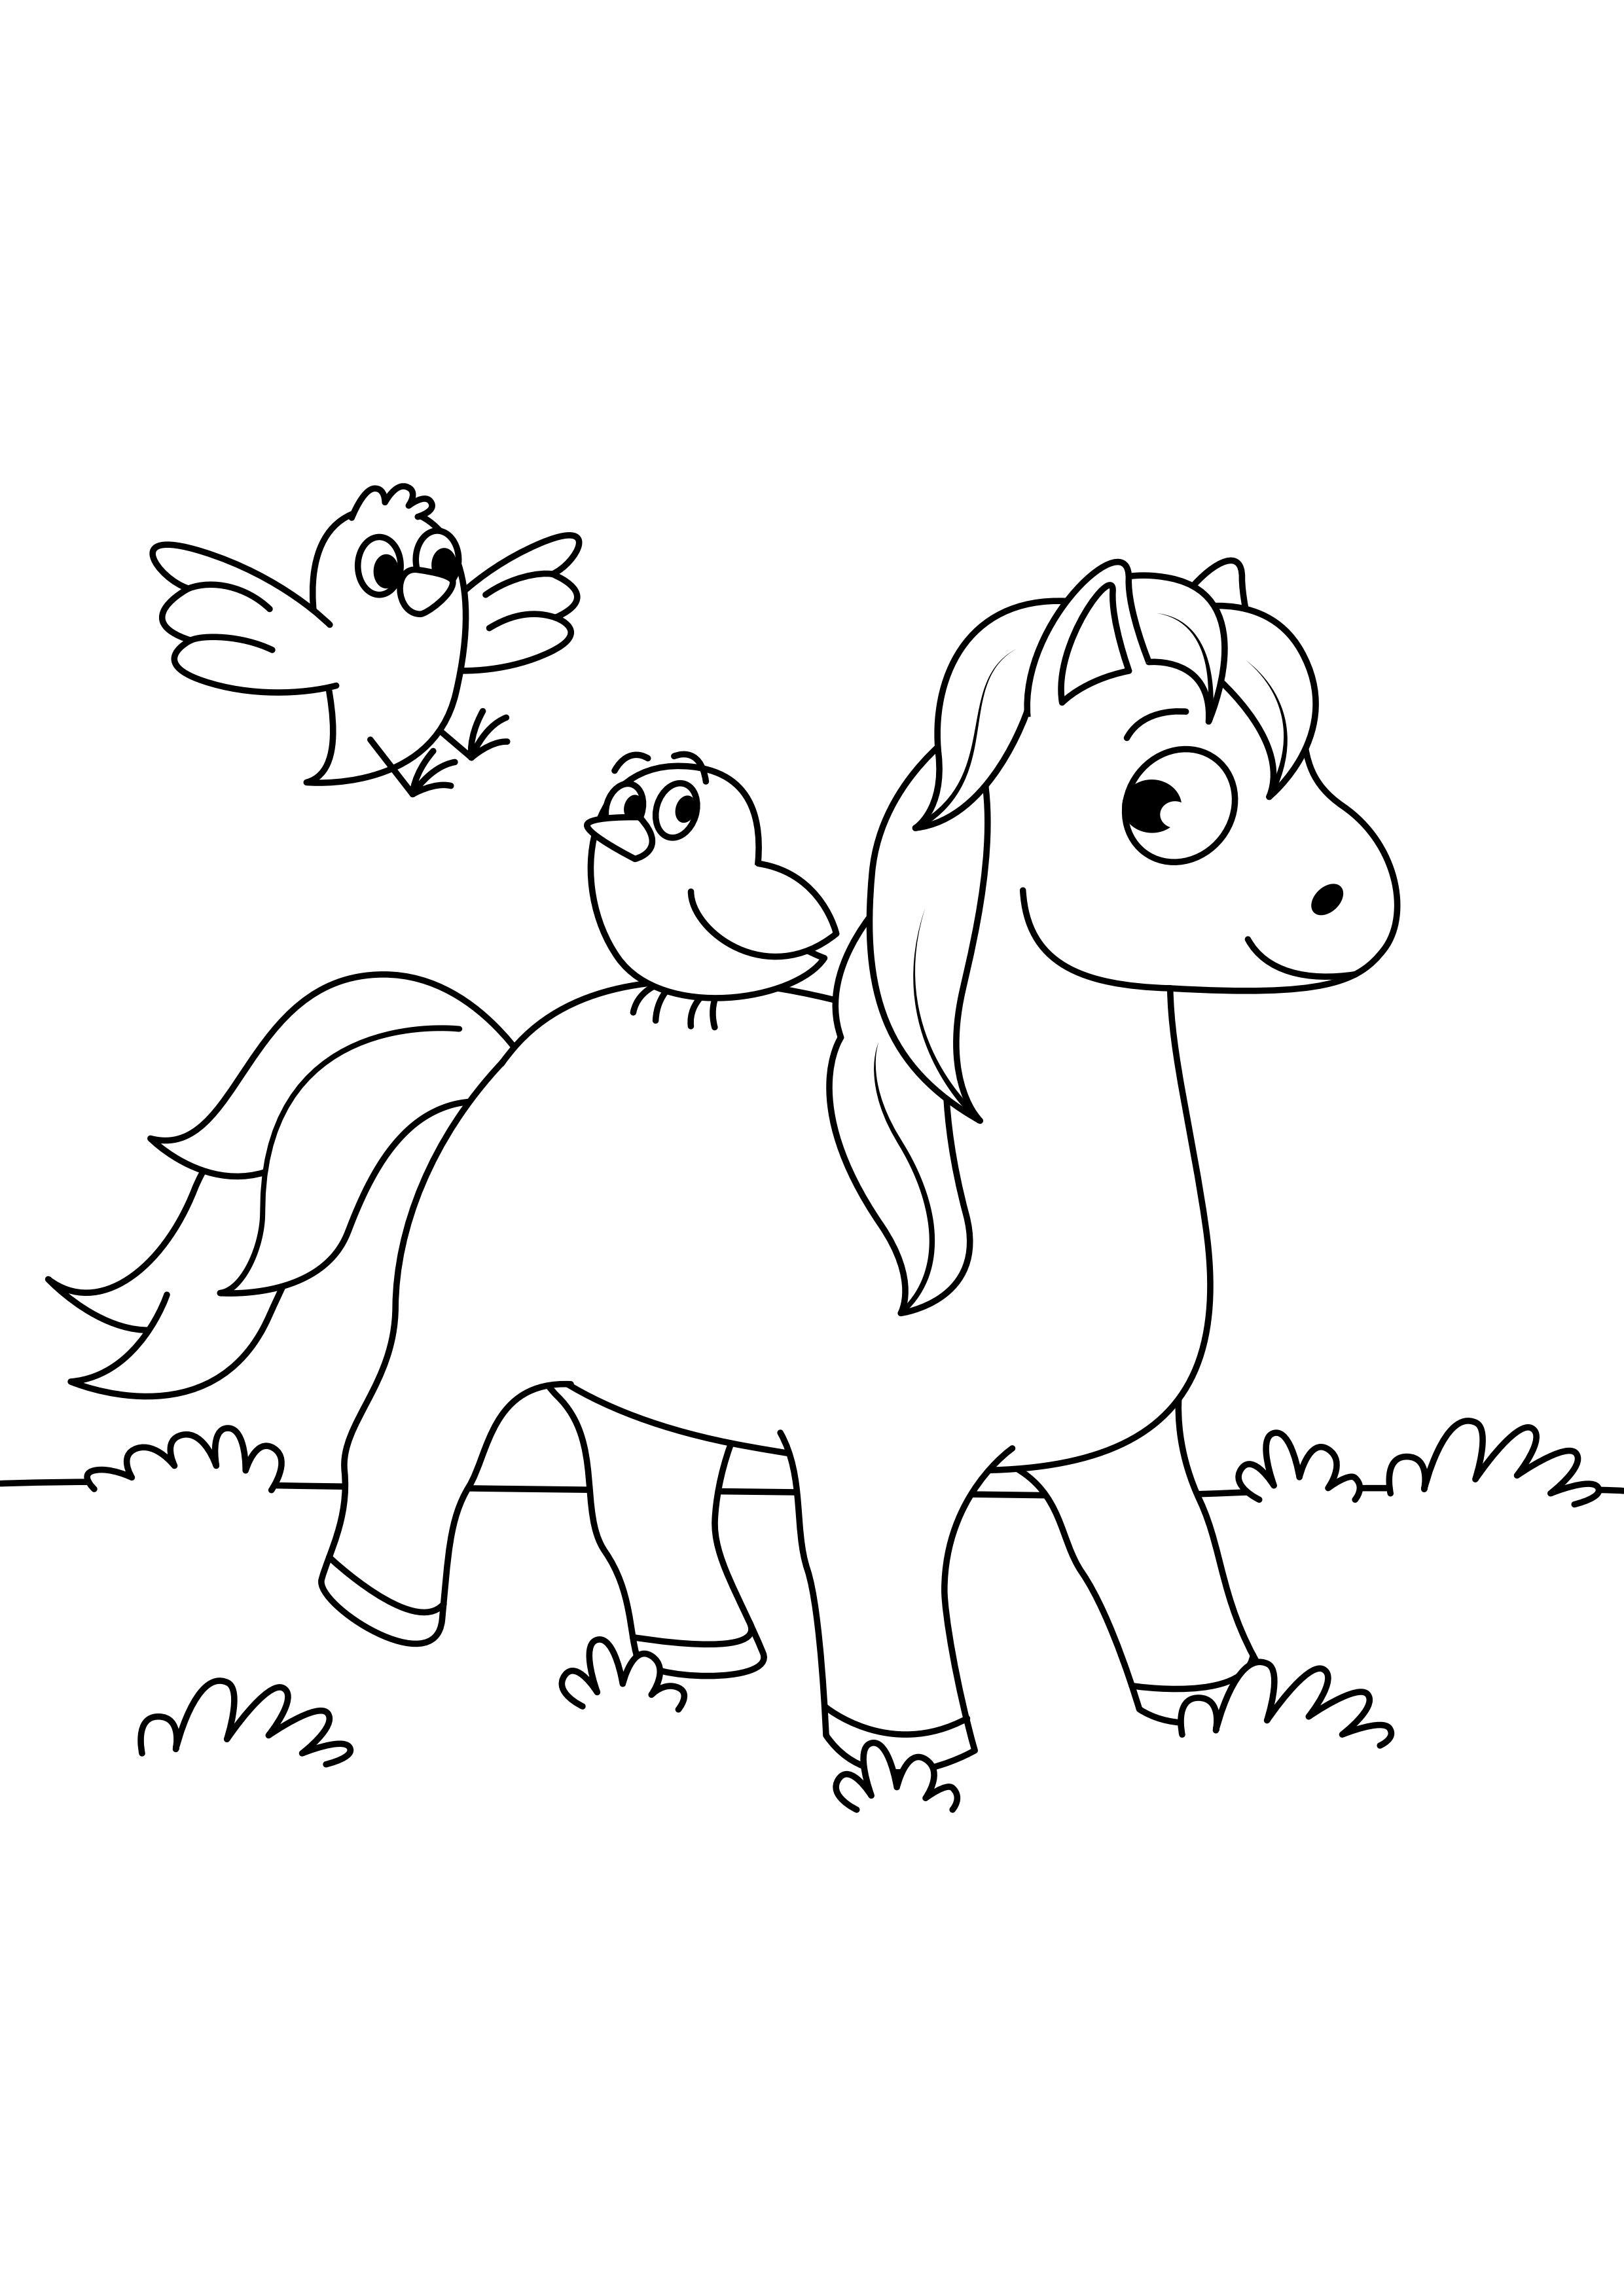 Coloring page horse with birds